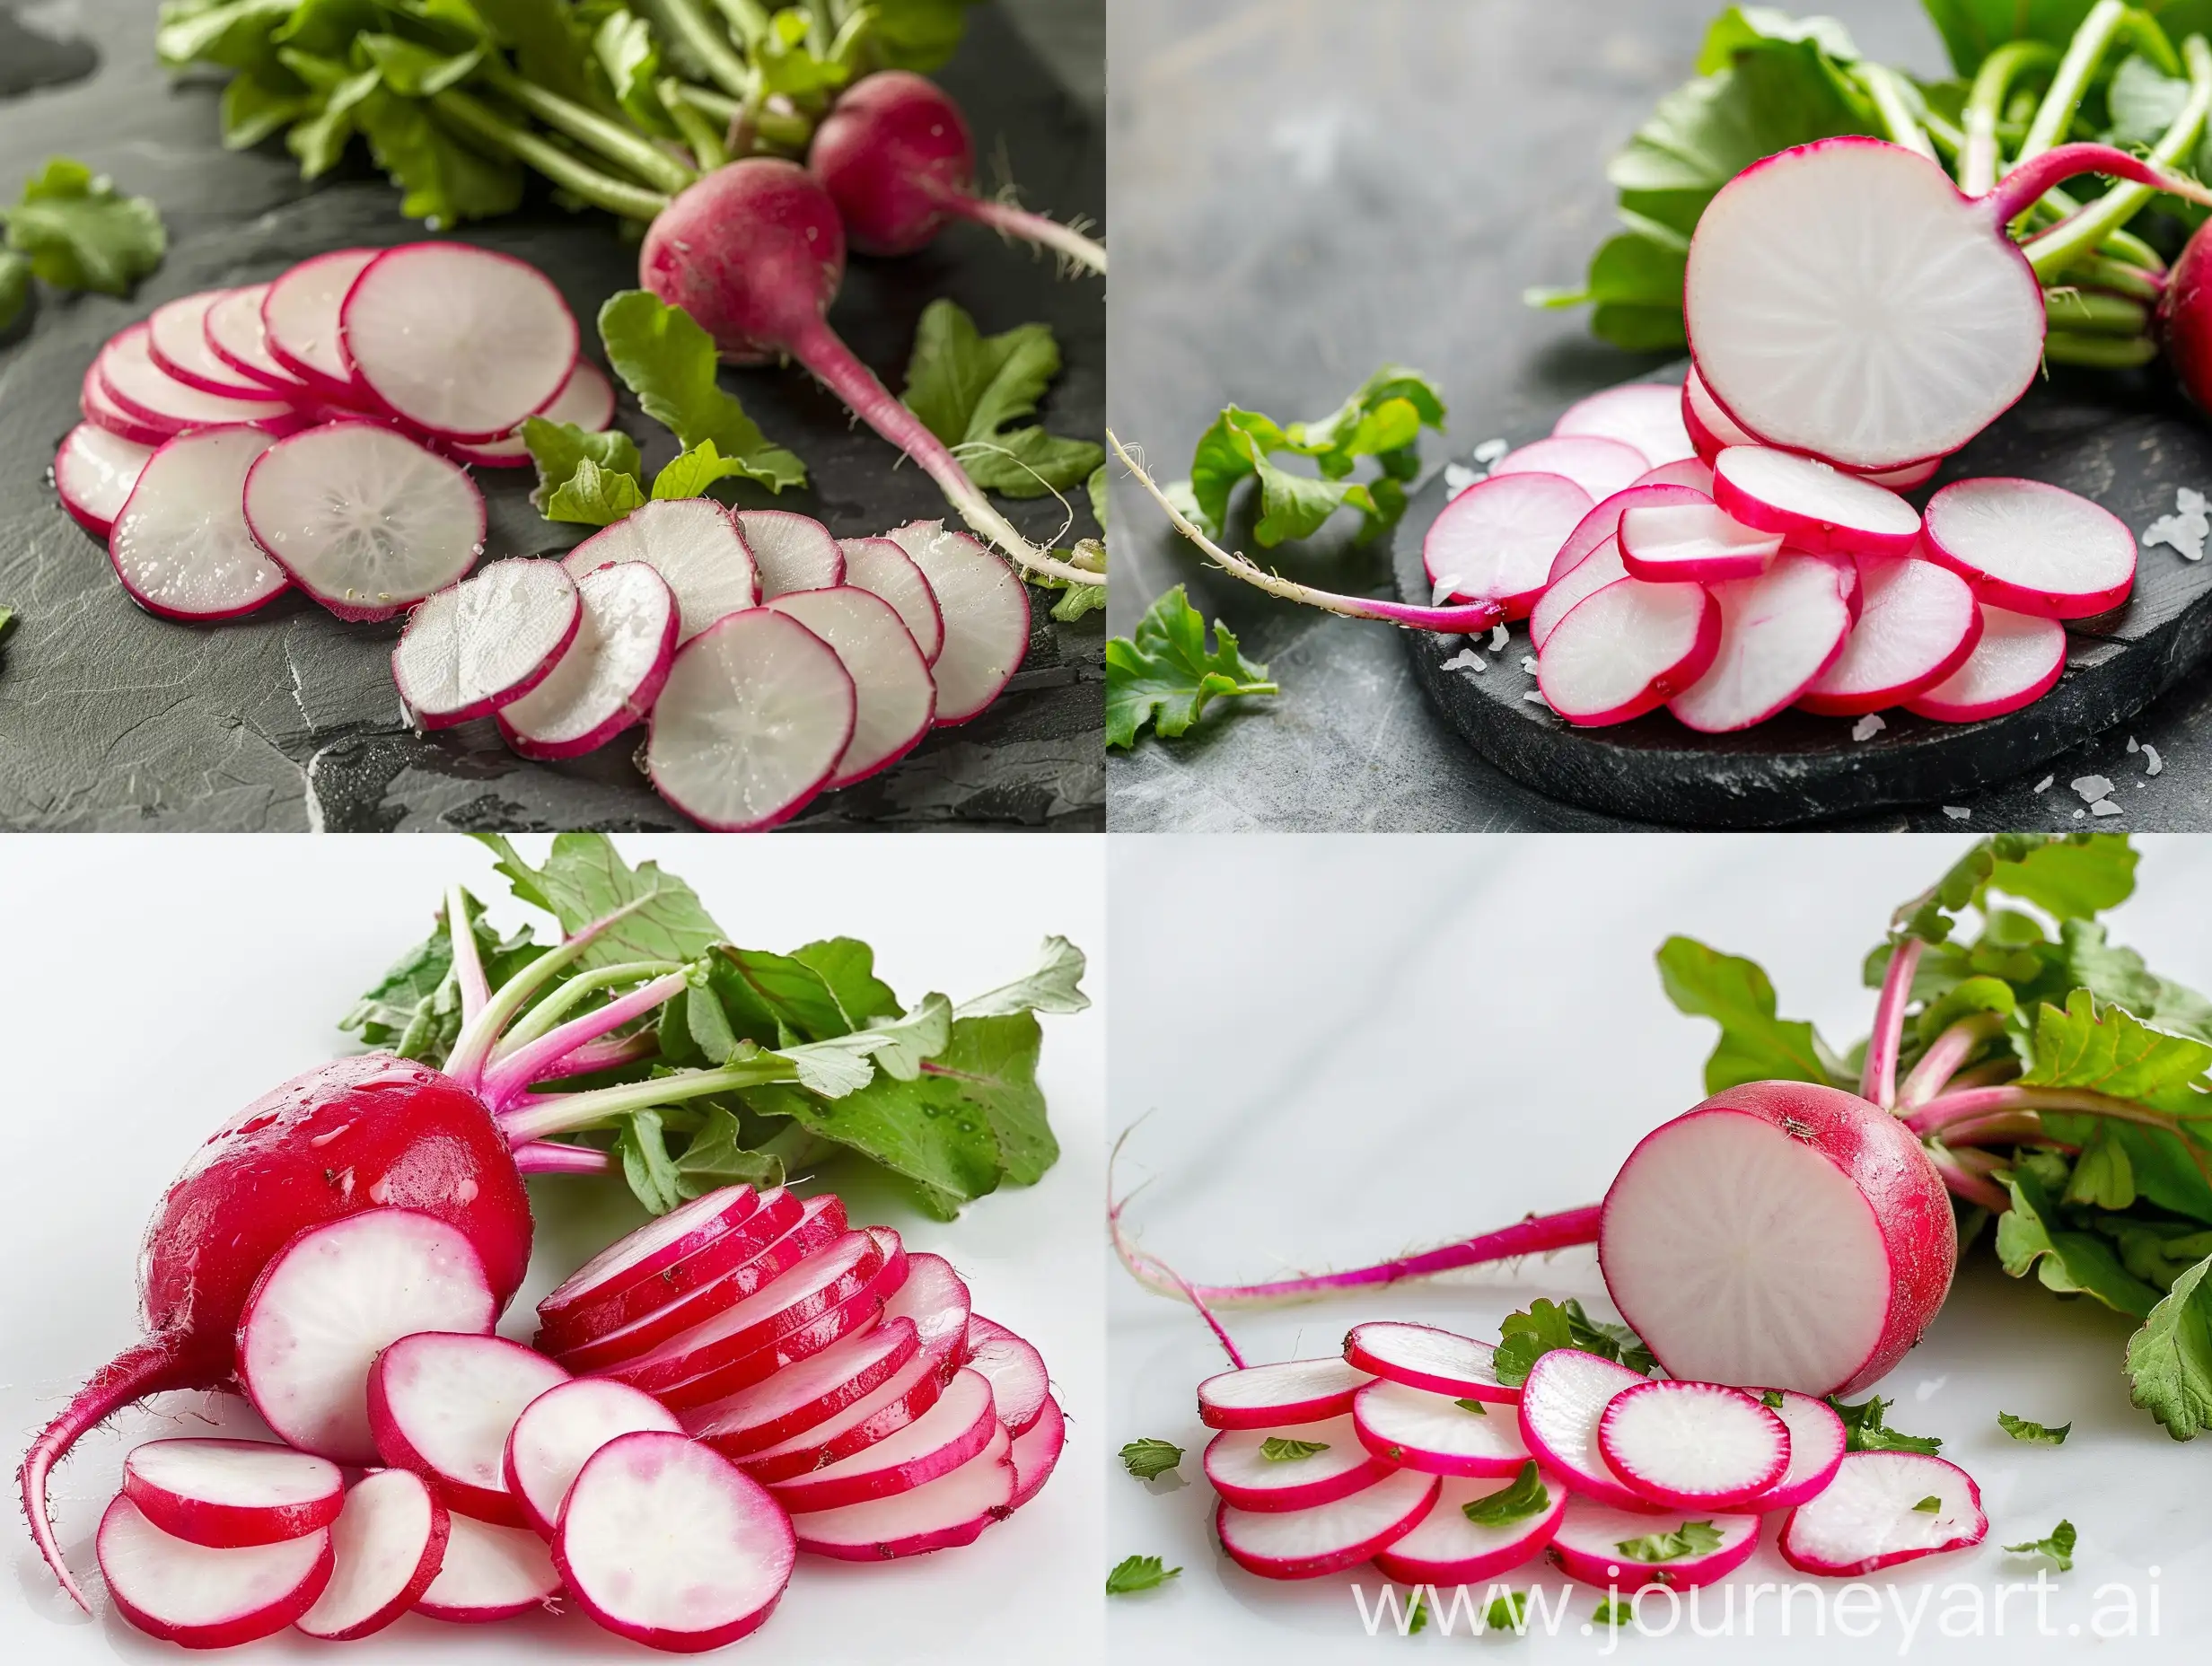 Real photo of radish with sliced pieces